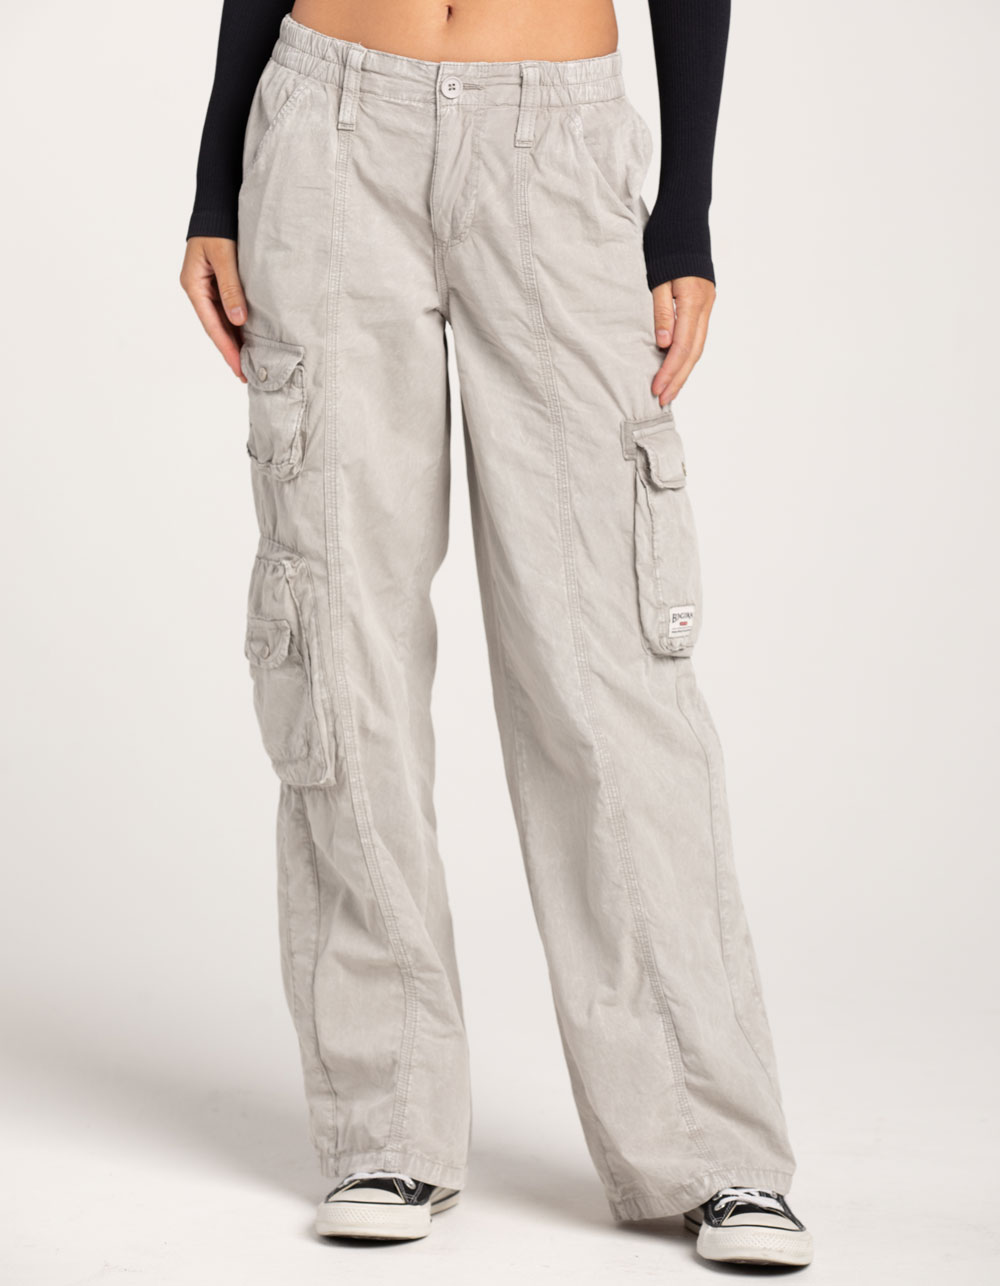 BDG Urban Outfitters New Y2K Womens Cargo Pants - LIGHT GRAY